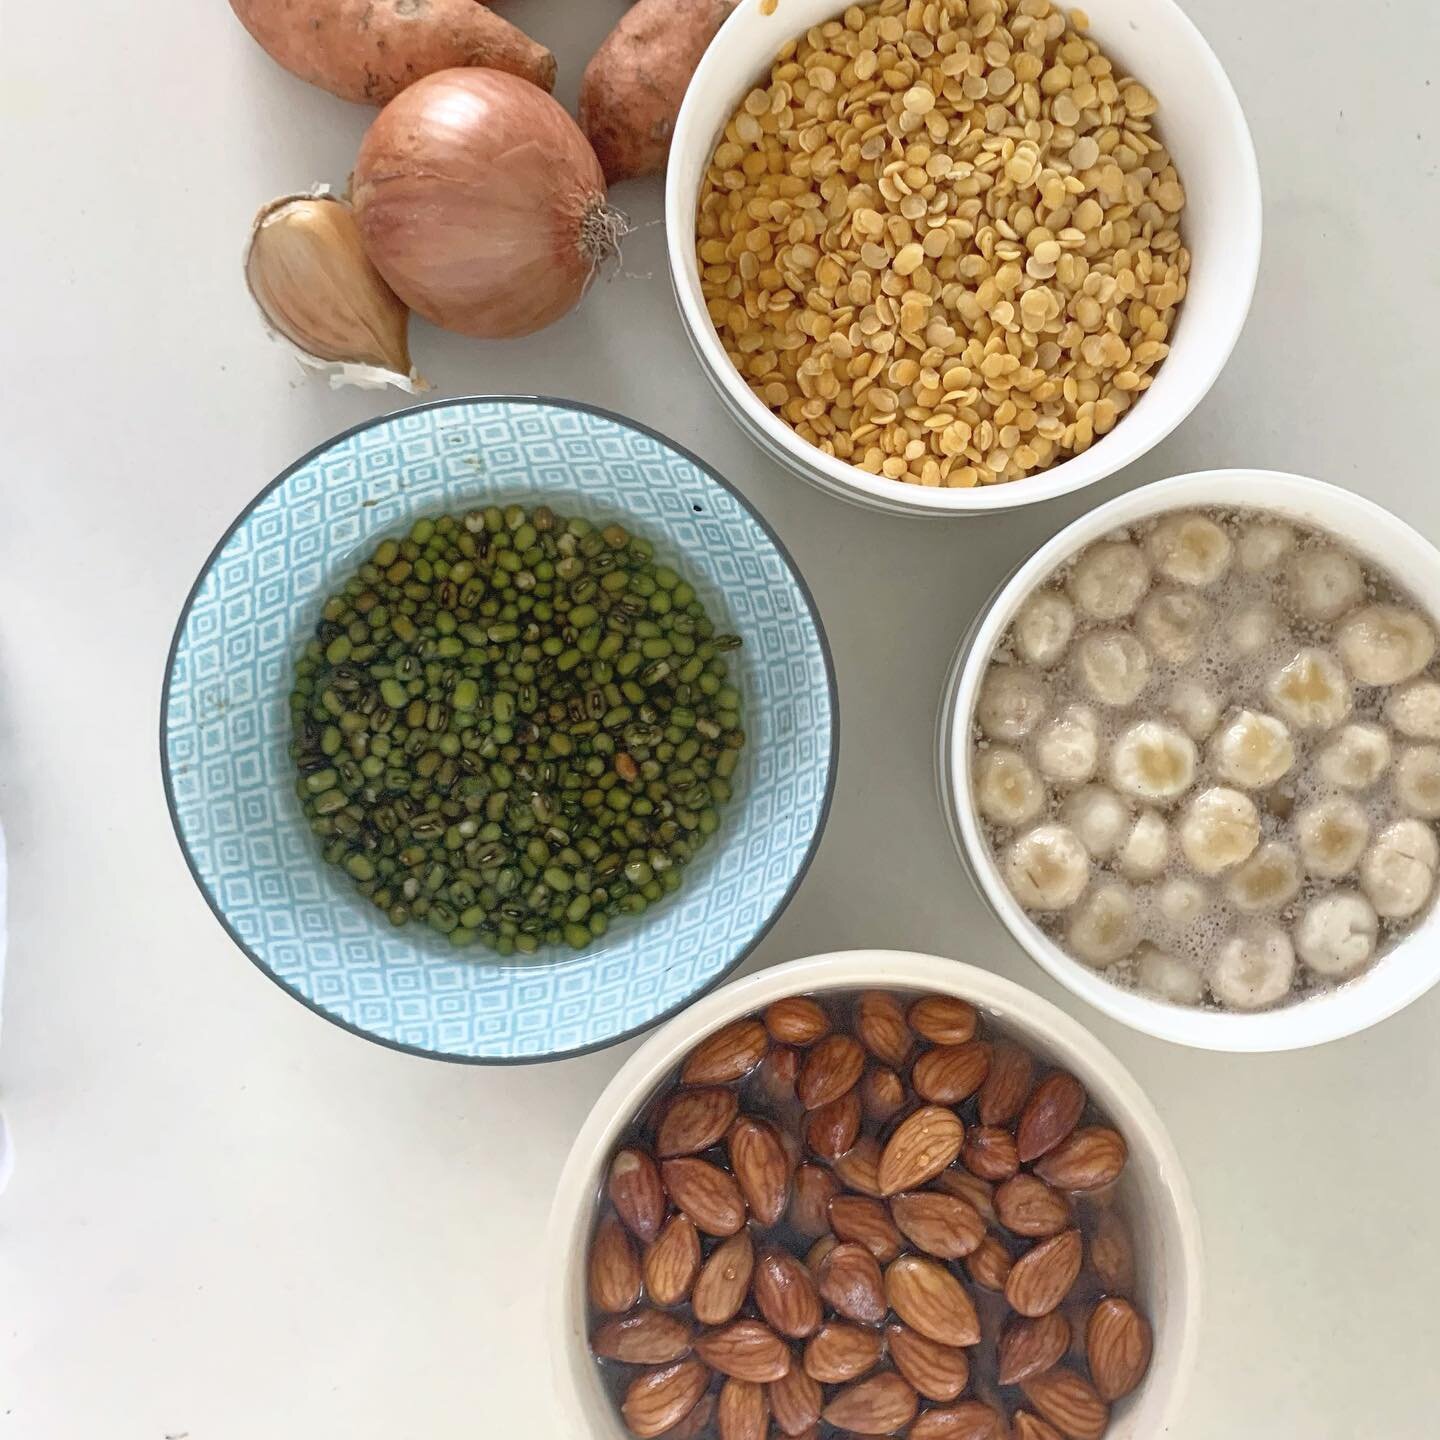 Soaking my nuts today....

Did you know?

Humans cannot absorb the phytic acid that coats nuts and grains. Soaking dissolves the phytic acid, hence activation. 

Try out organic almonds soaked in kombucha, Celtic sea salt and filtered water. Slowly r